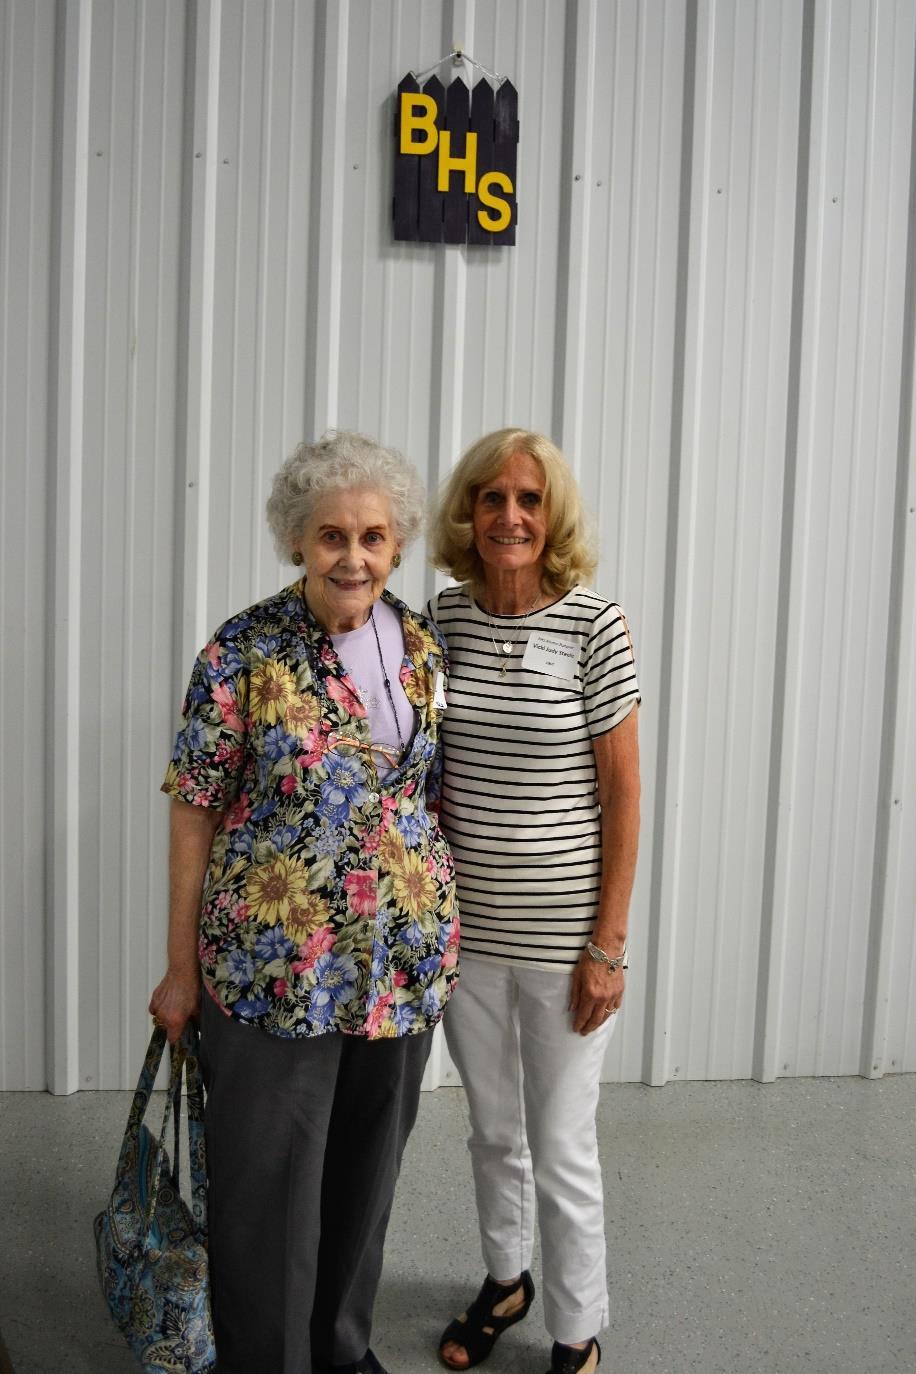 Recognition of those from the earliest class represented at the banquet went to Joan Bratton Holsapple (on left) from the class of 1942 (75 years